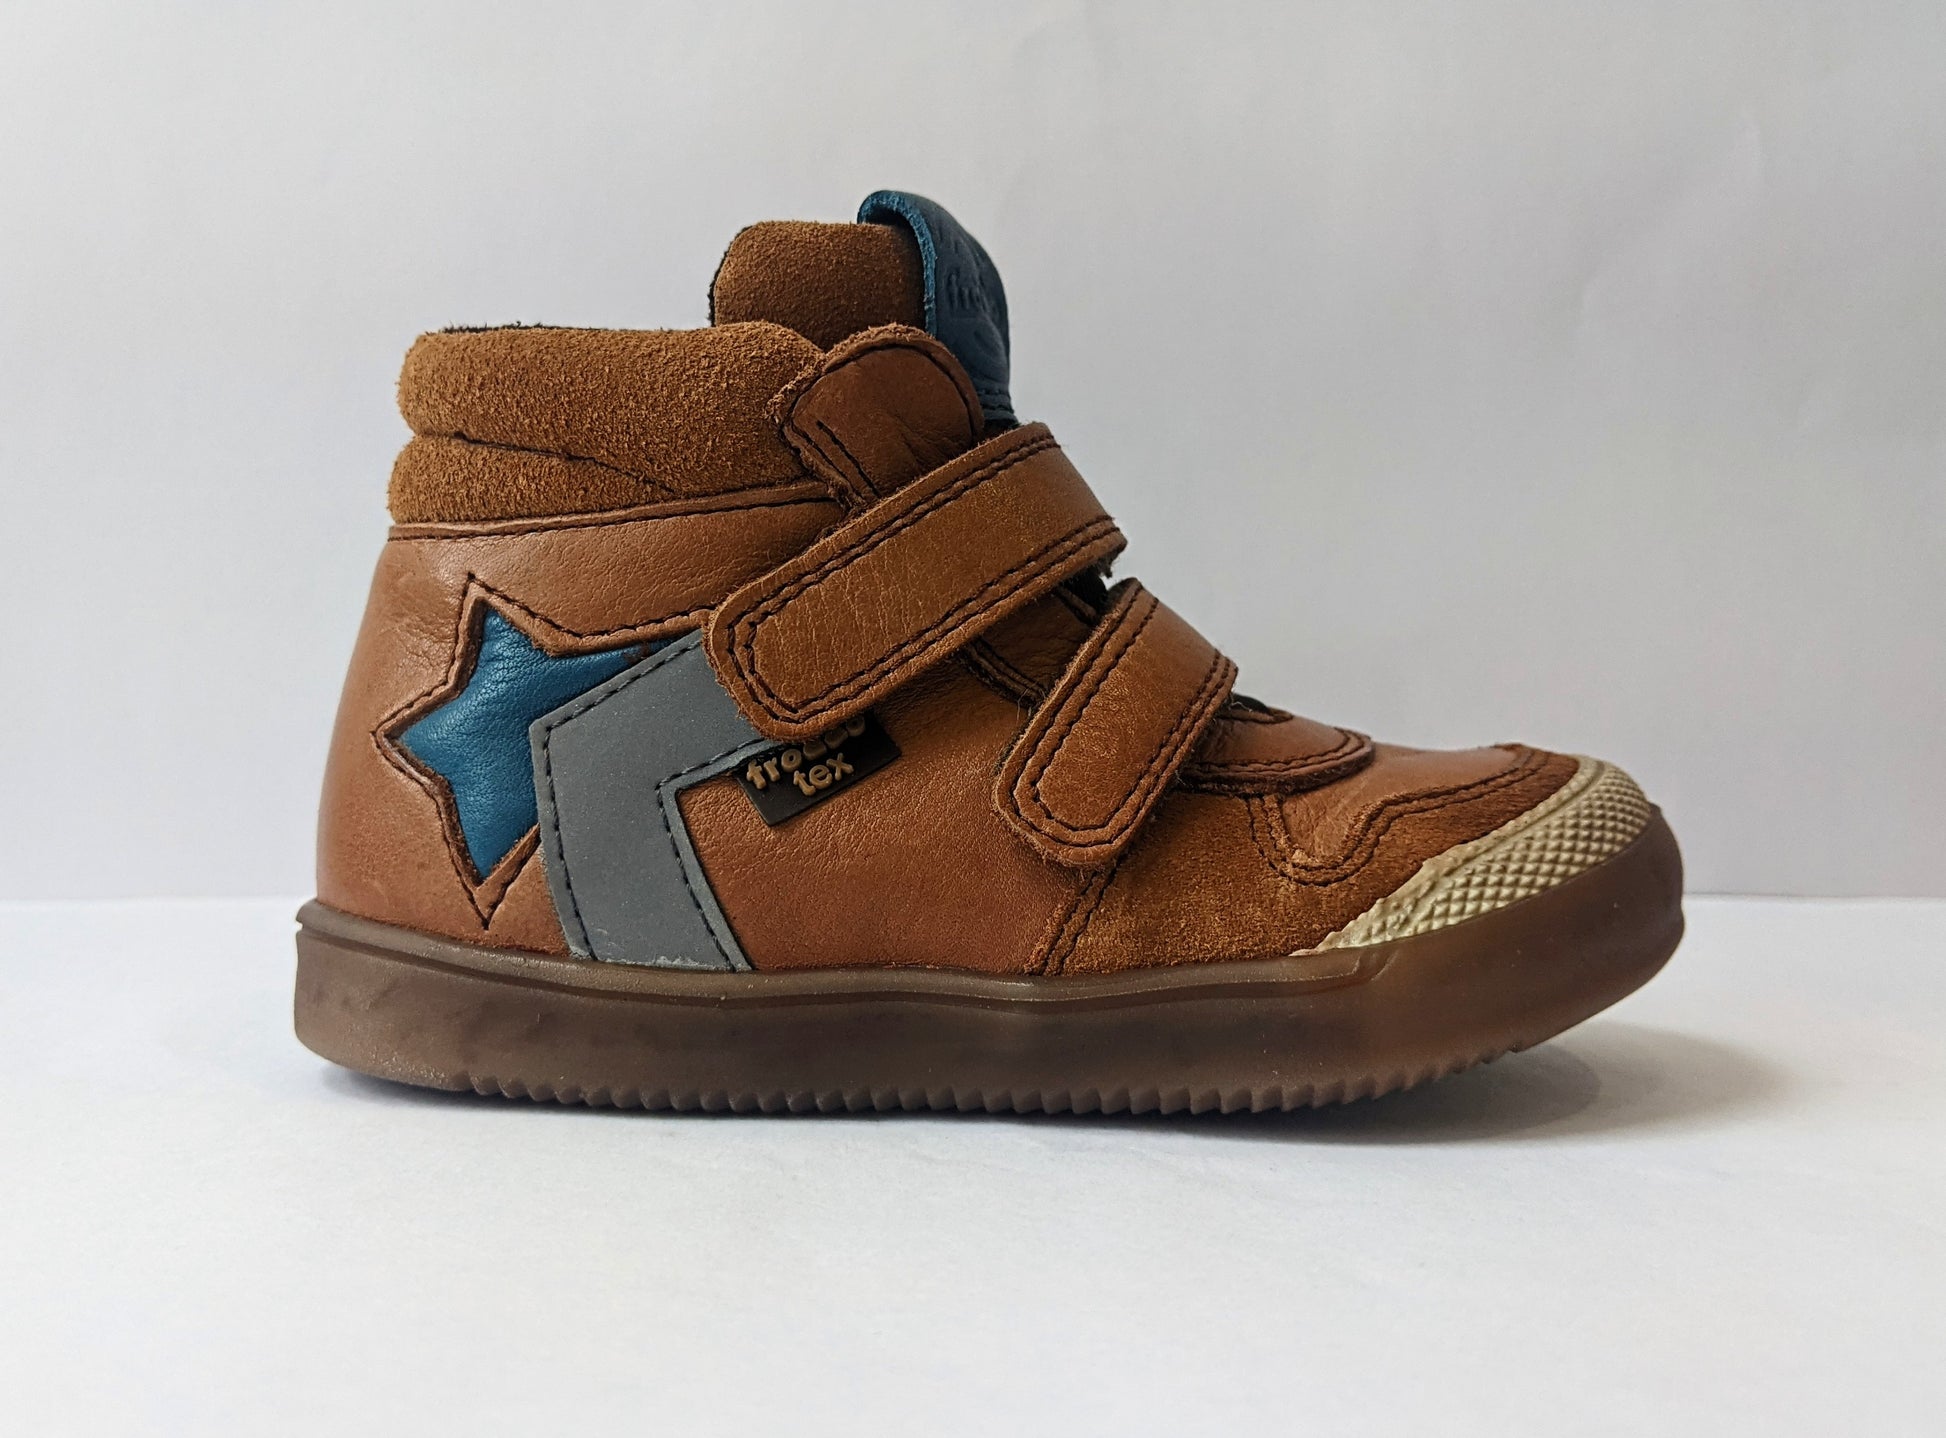 A boys casual ankle boot by Froddo, style G2110083, in tan multi with double velcro fastening. Right side view.